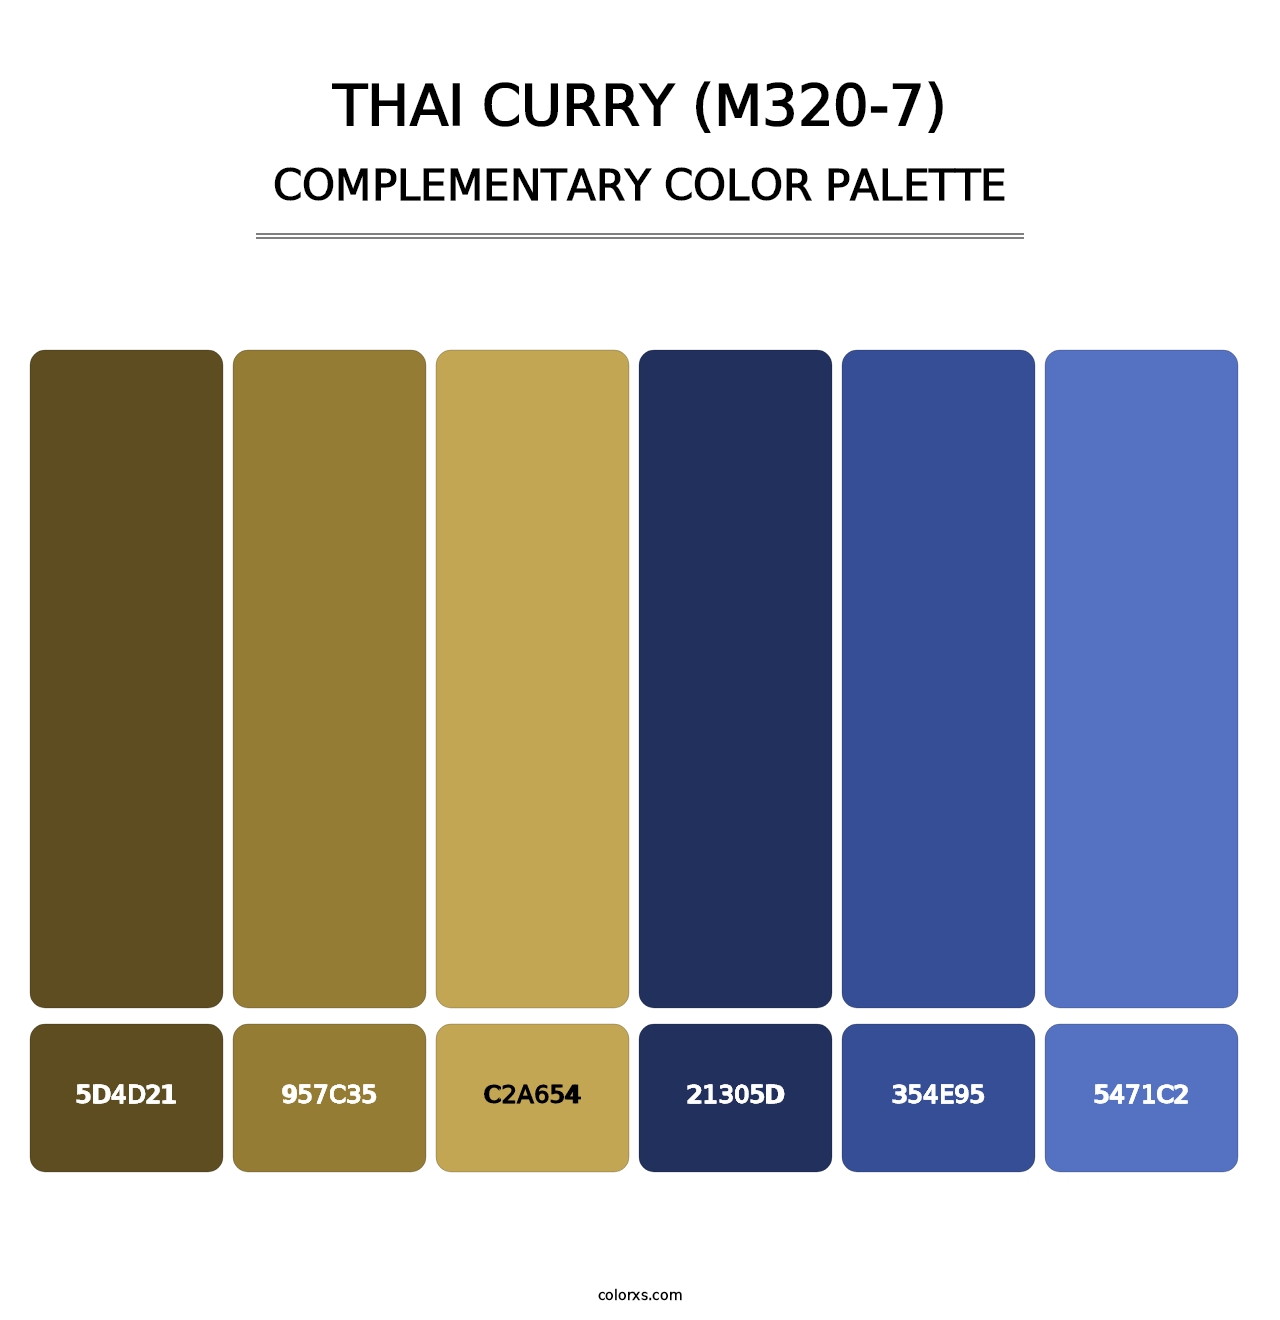 Thai Curry (M320-7) - Complementary Color Palette